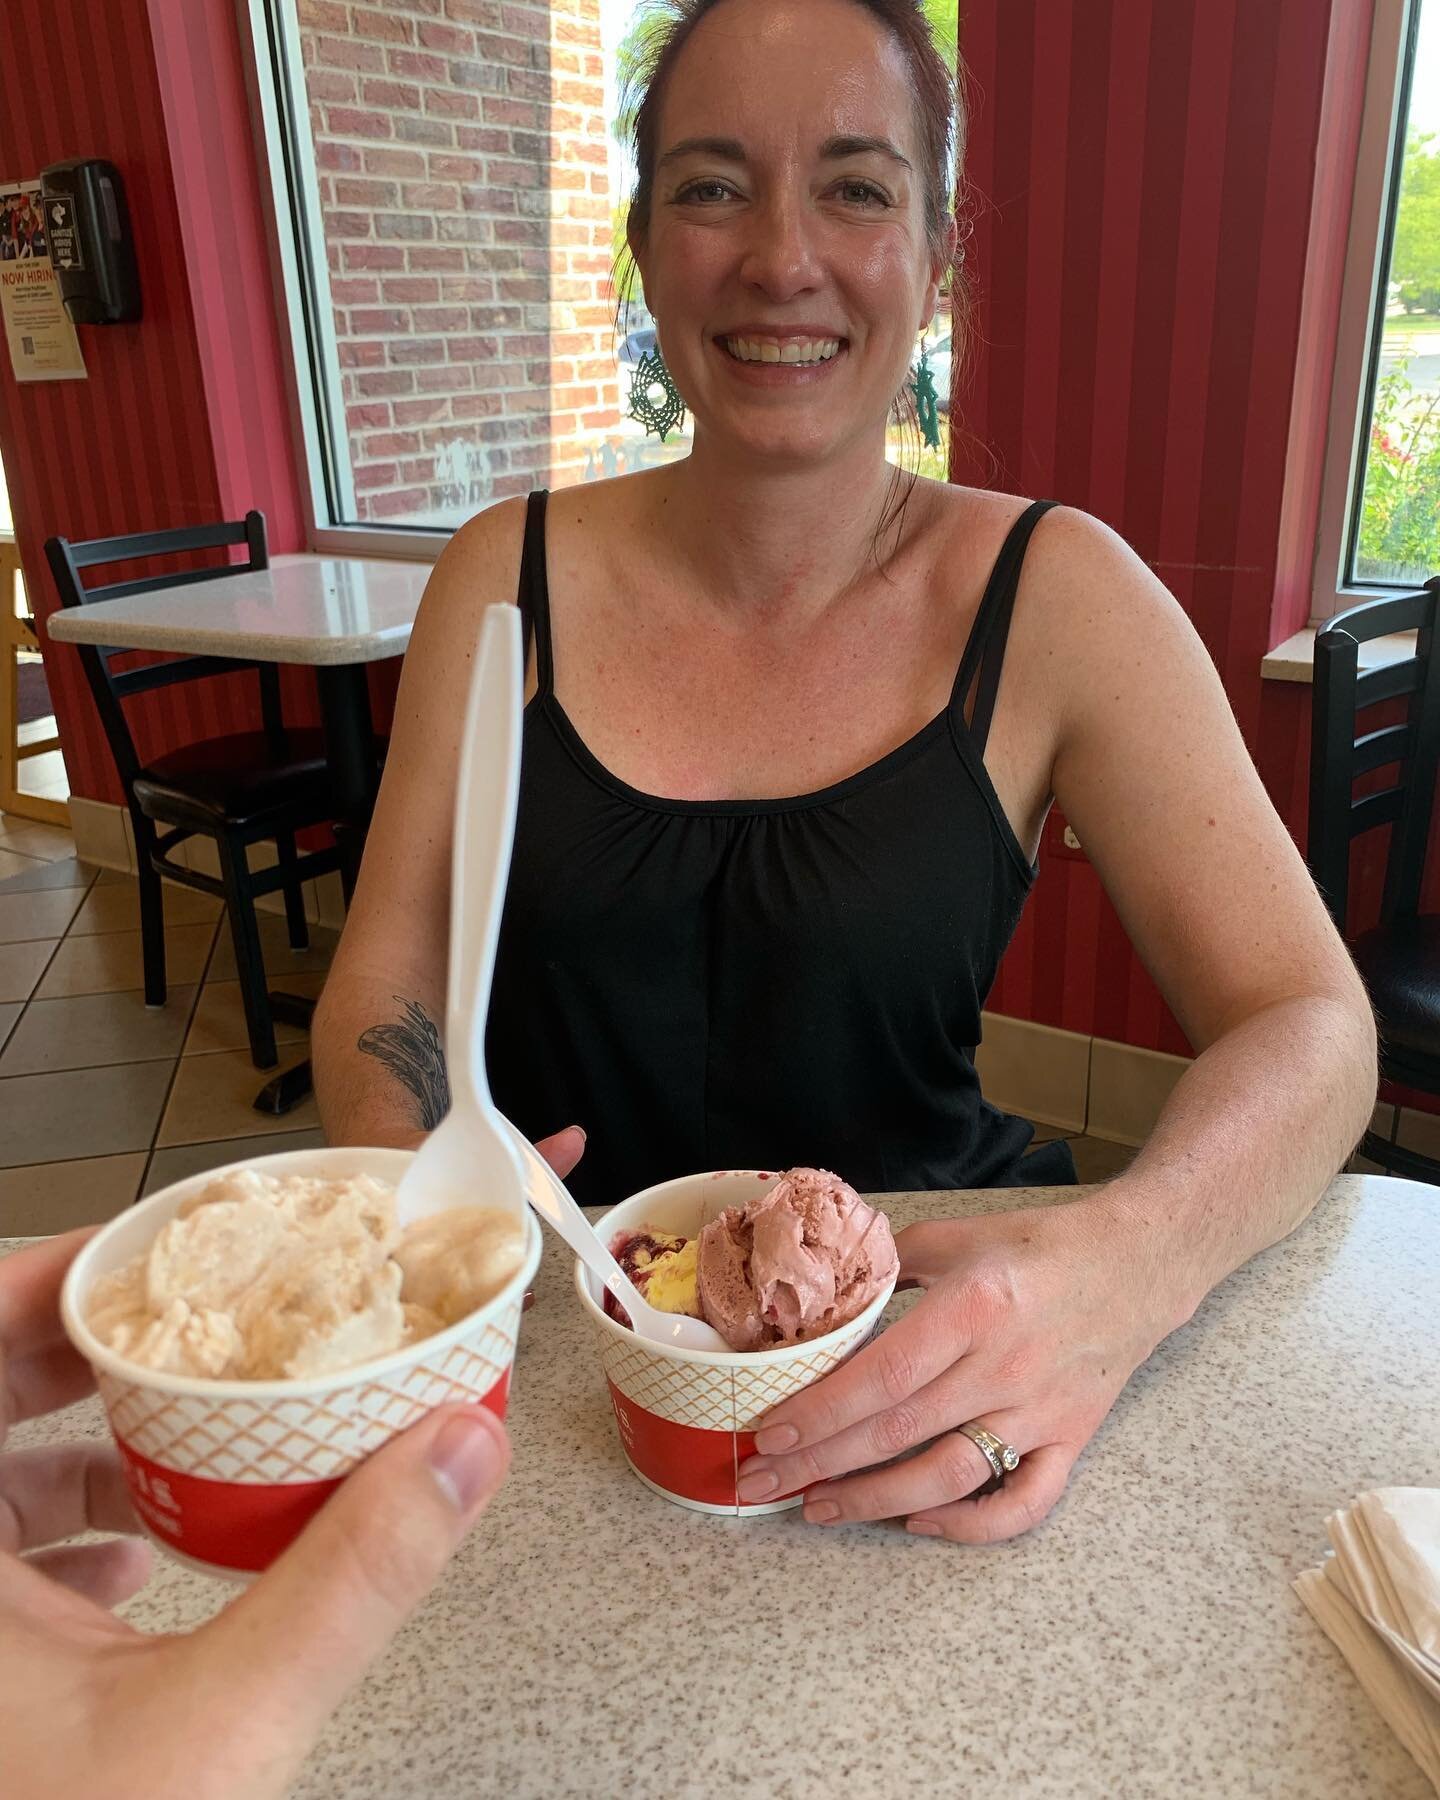 When it feels like 107 degrees and you get ice cream for lunch 🥵 🍨 😋 #lifeisgood #lifegoals #grownups